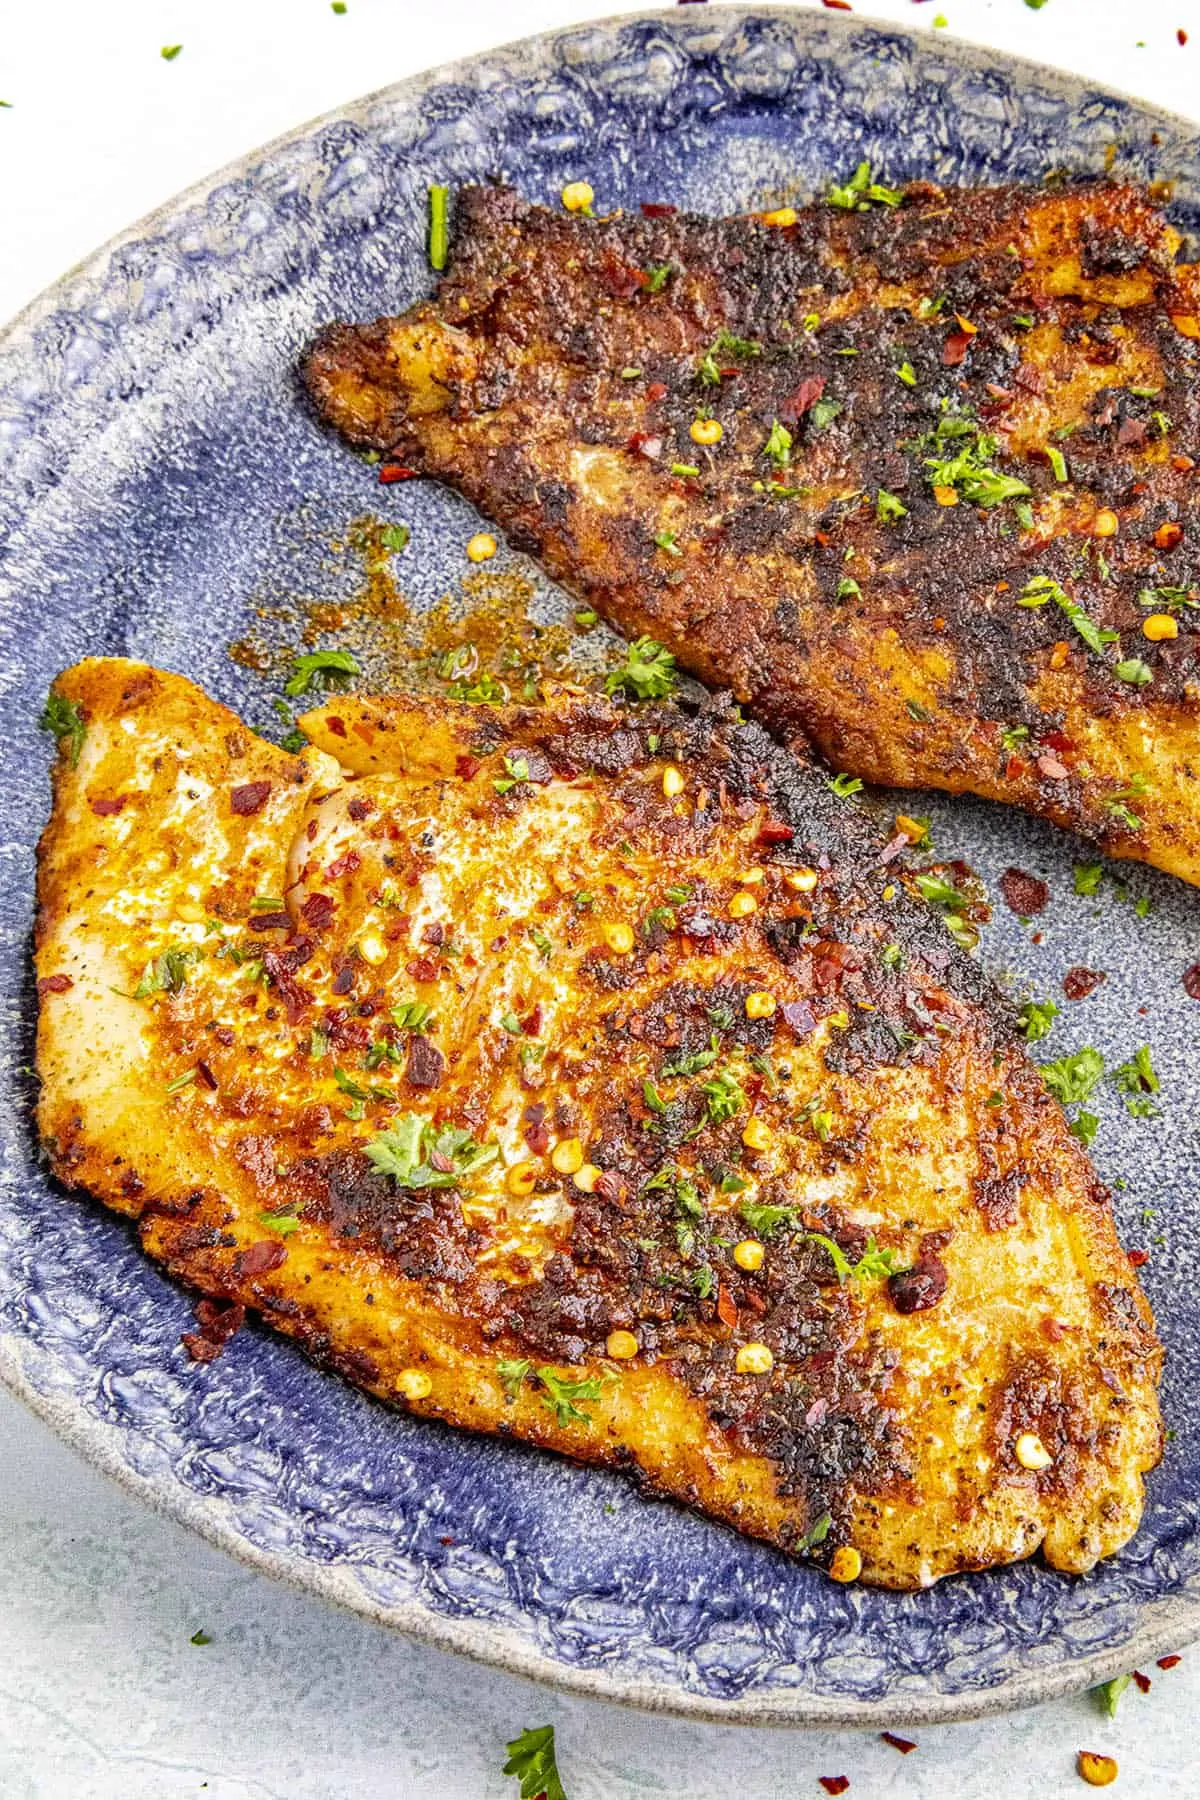 Two pieces of Blackened Fish on a plate